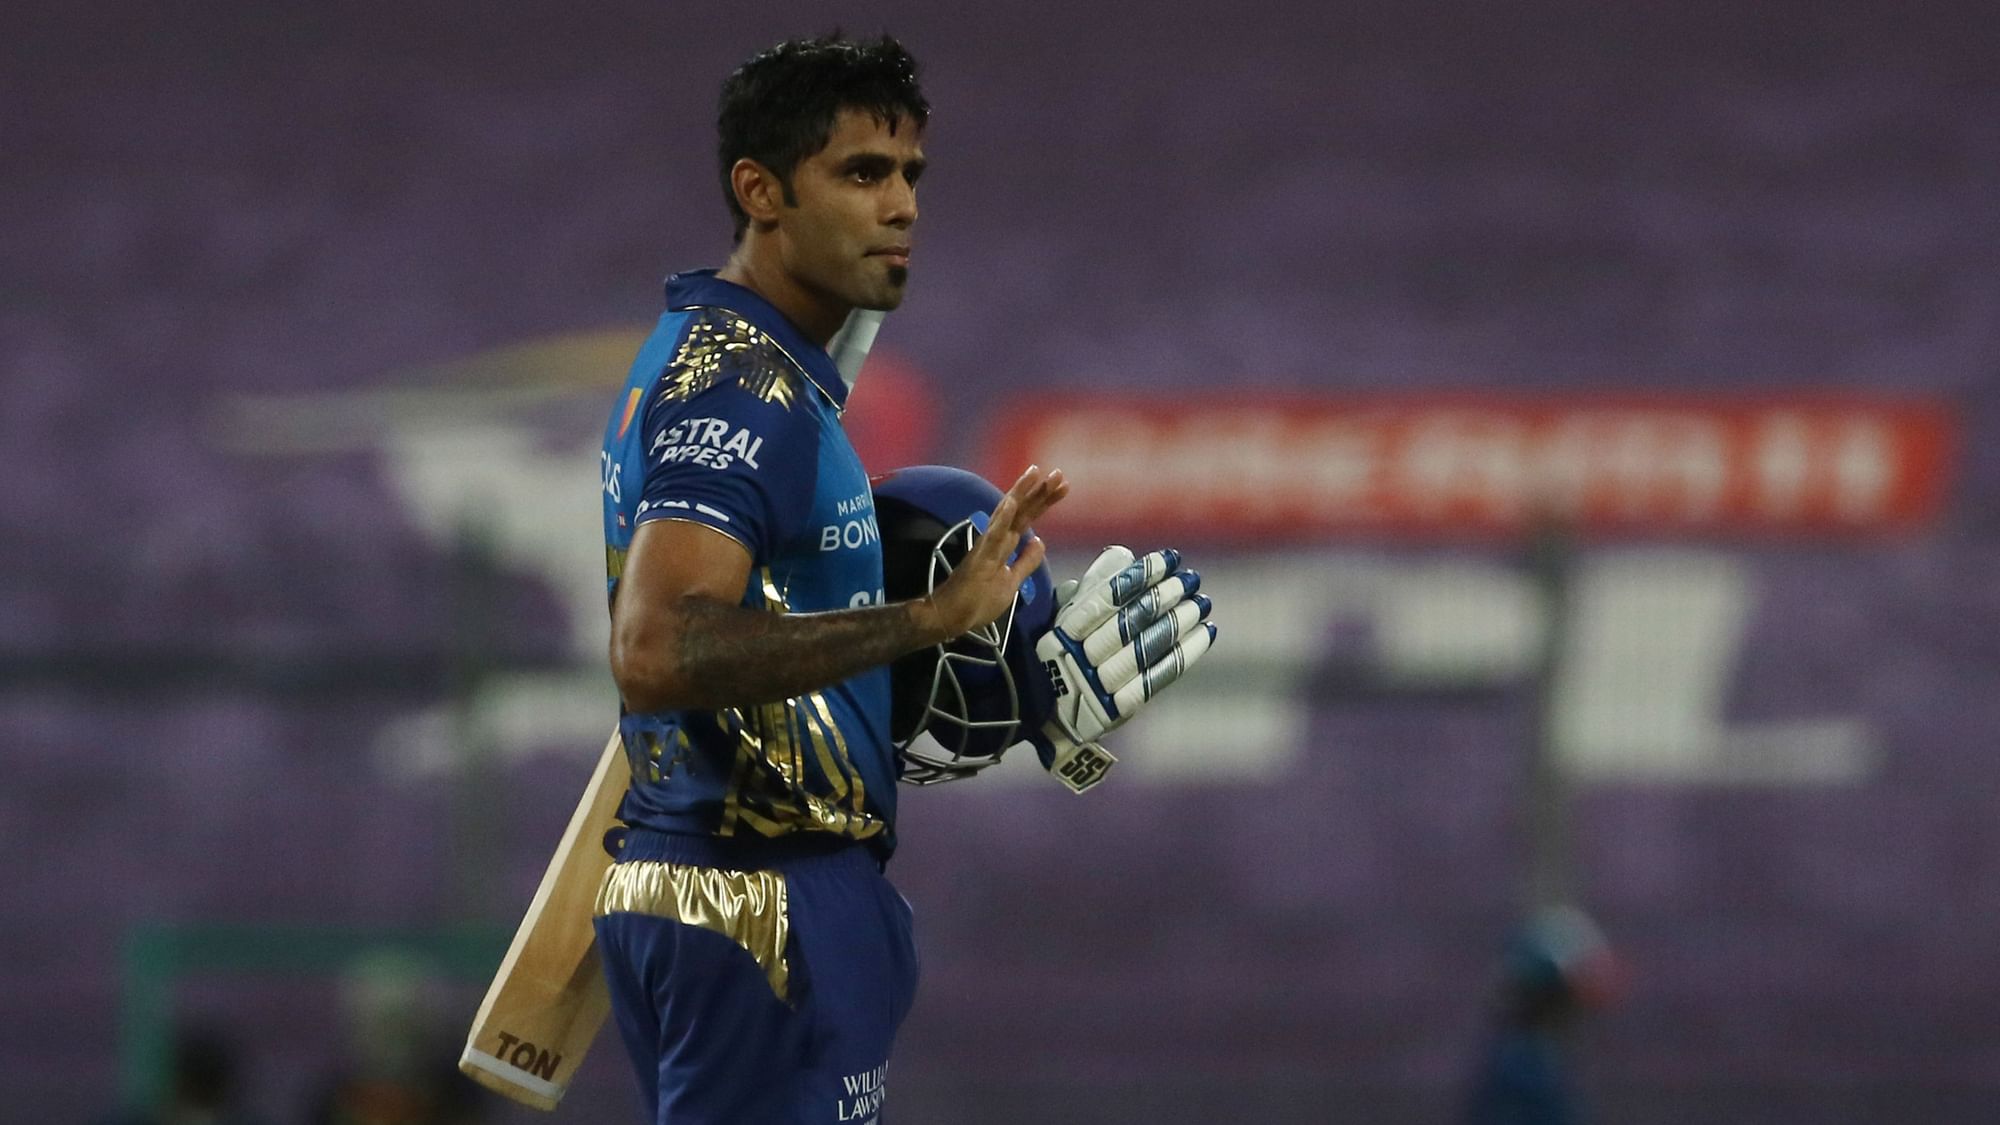 Suryakumar Yadav earned his maiden call up to the Indian team for the England T20I series.